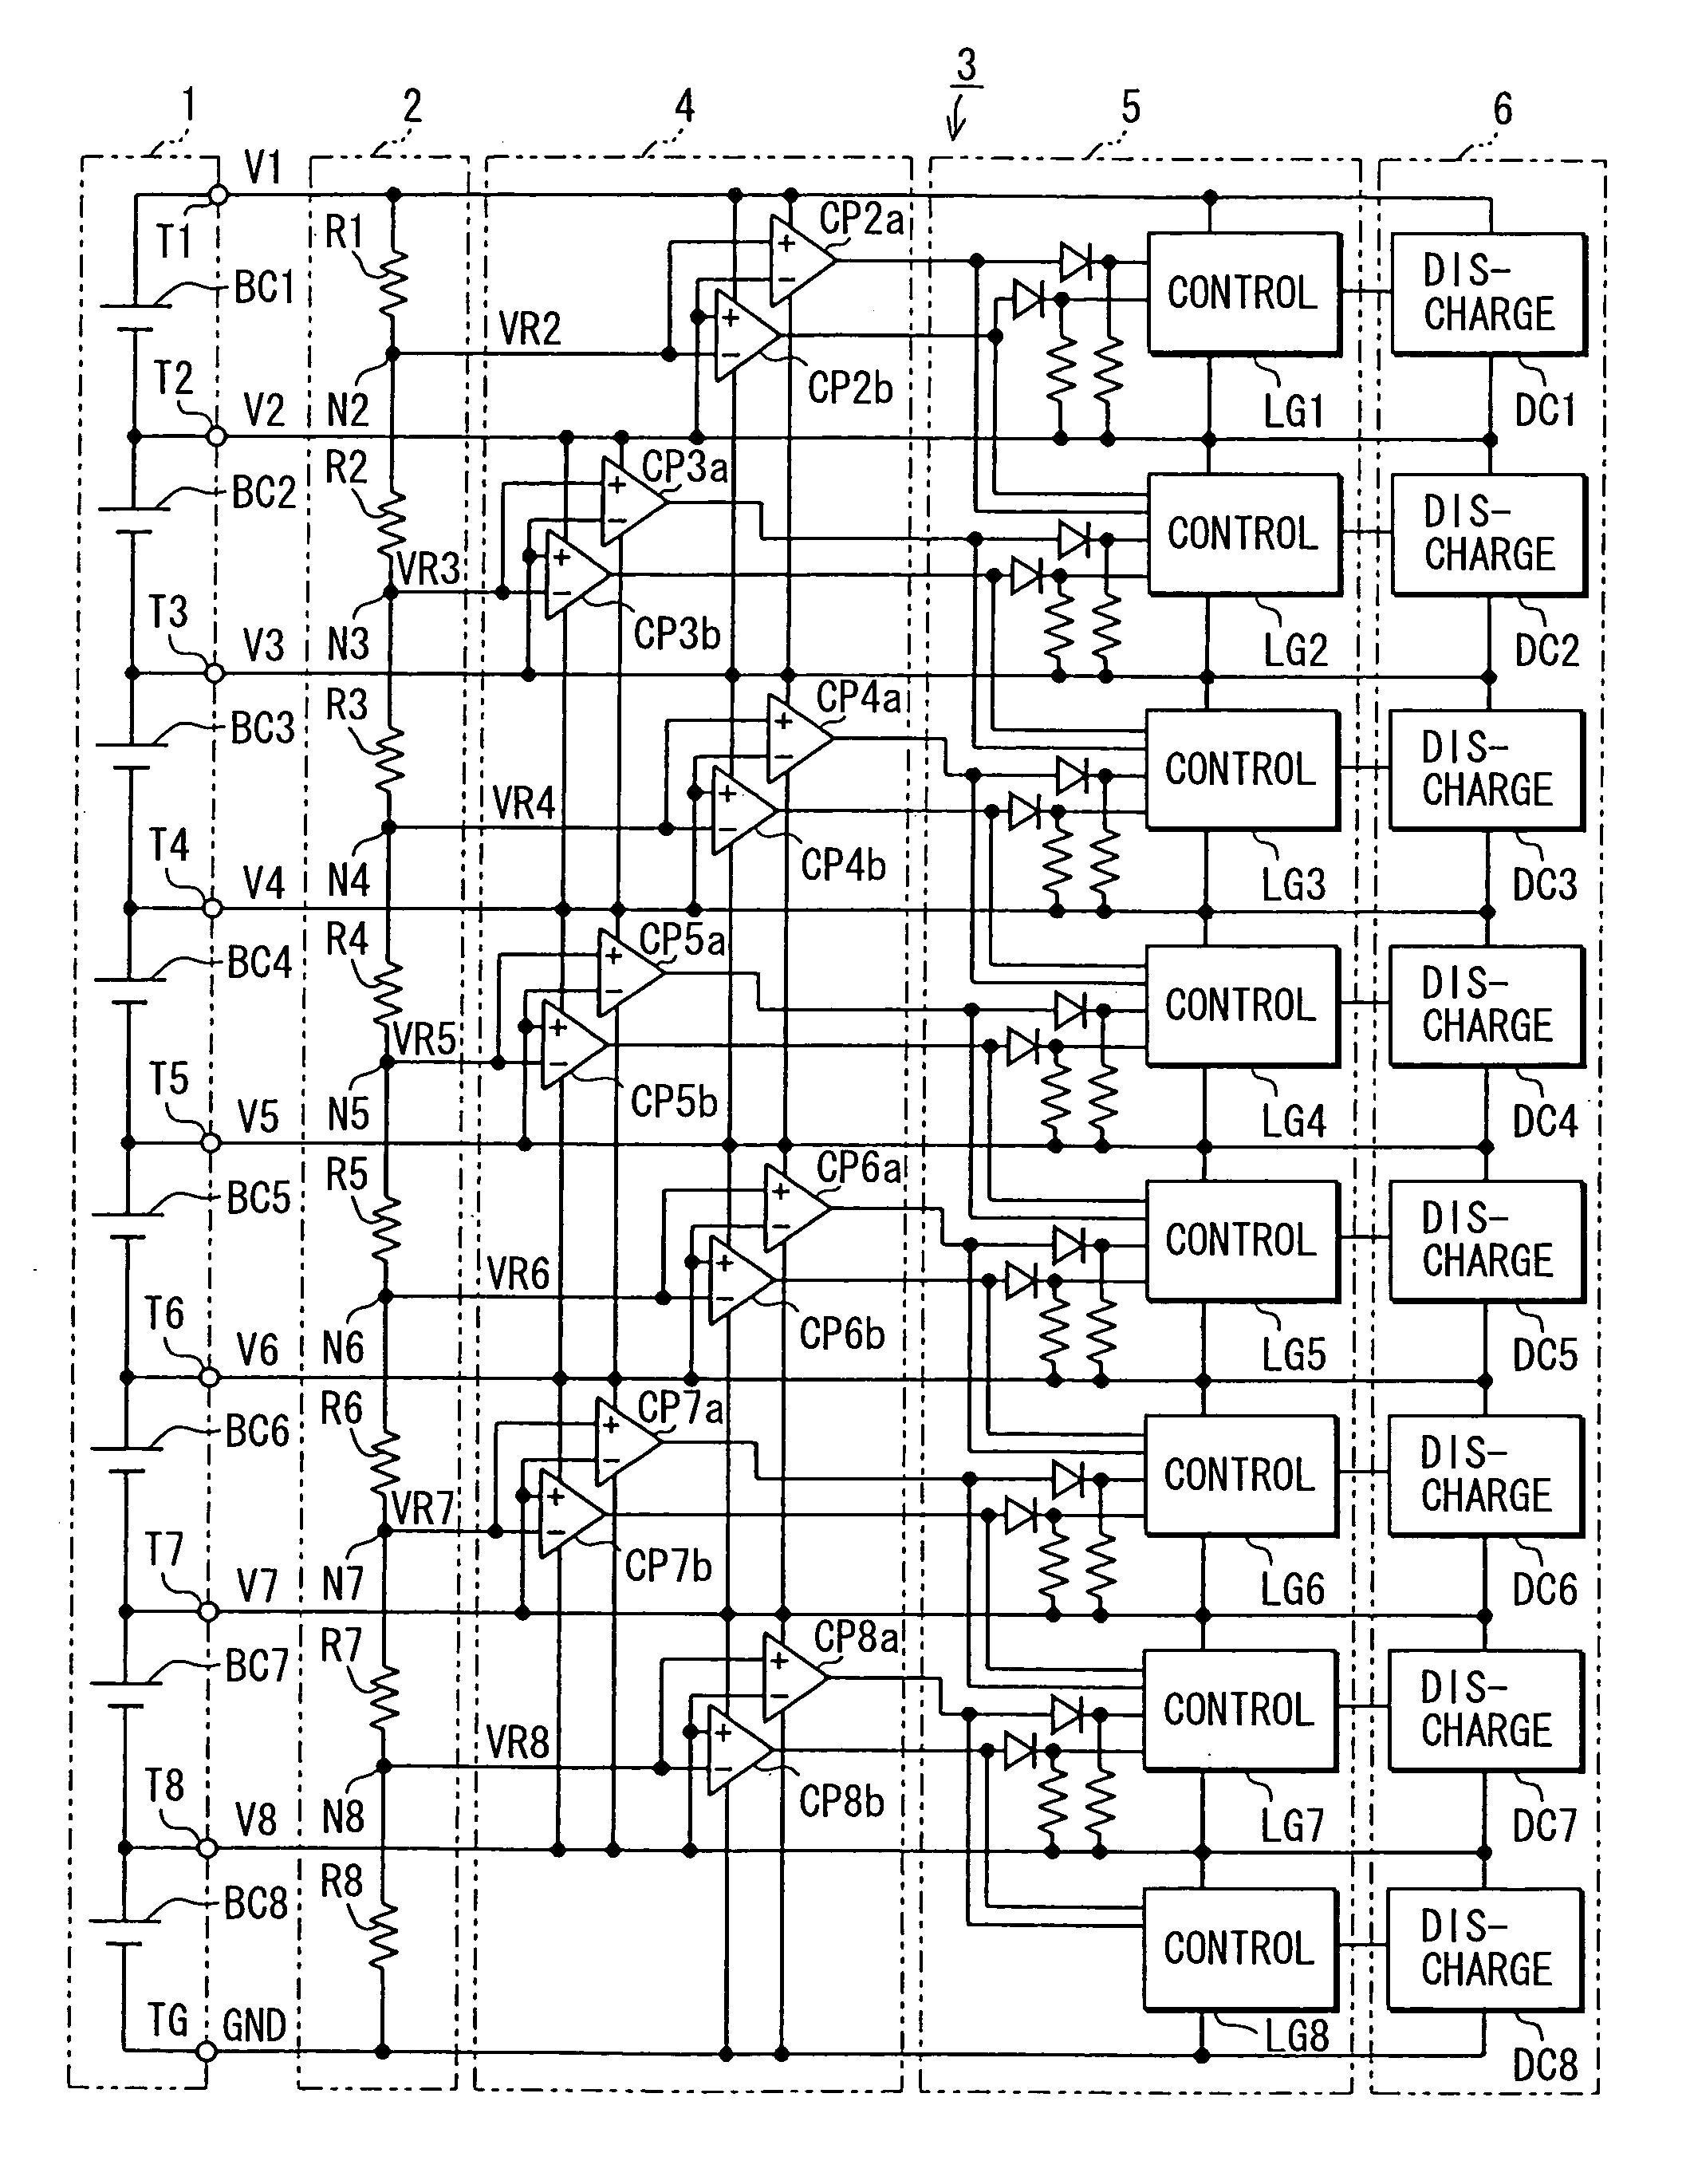 Cell voltage equalization apparatus for combined battery pack including circuit driven by power supplied by the combined battery pack